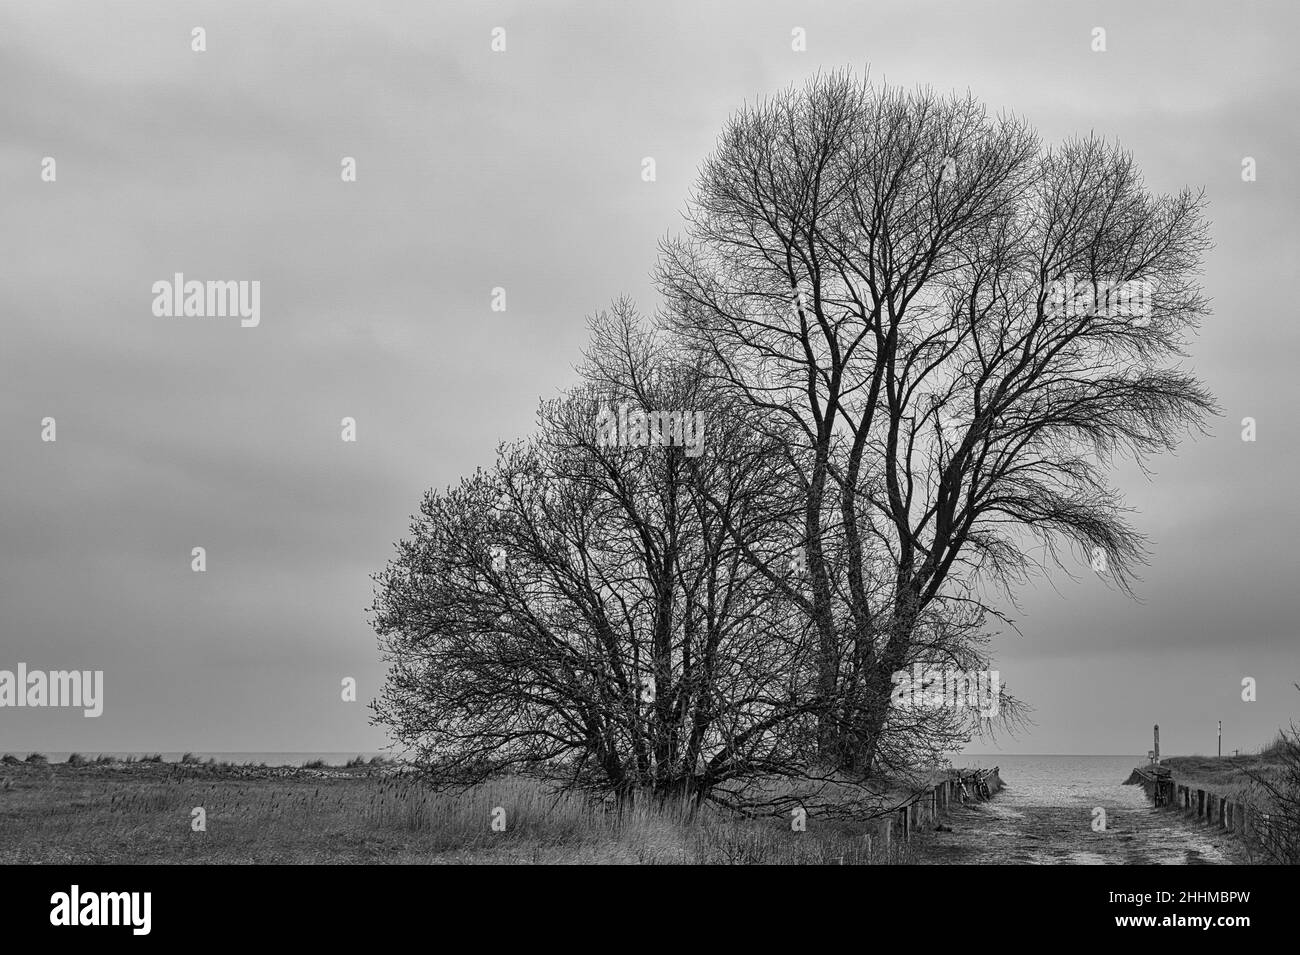 trees on the beach transition to the Baltic Sea in black and white . dreamy and romantic, can also be the cold season. Stock Photo